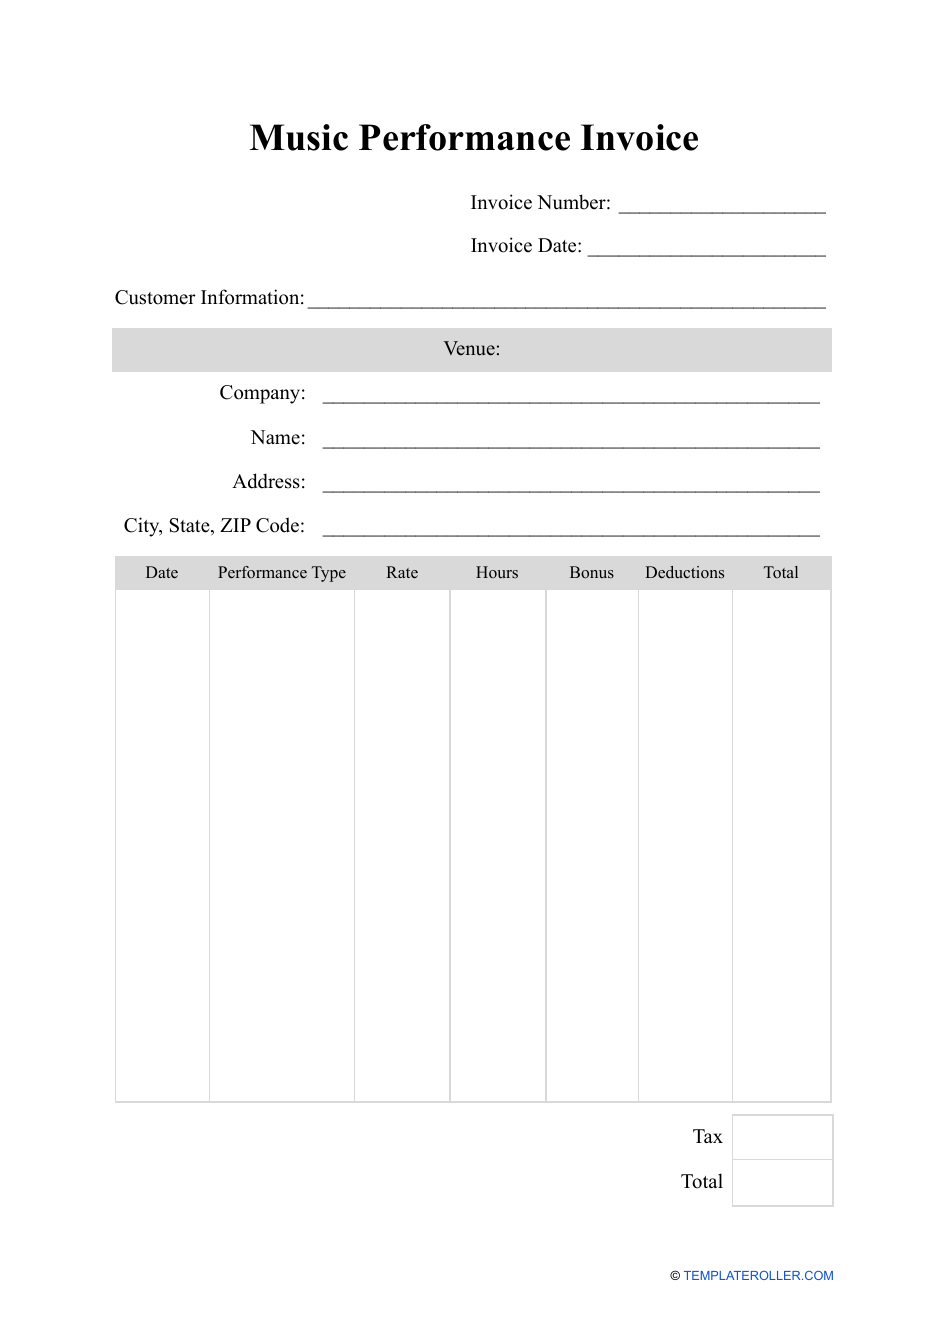 Music Performance Invoice Template, Page 1